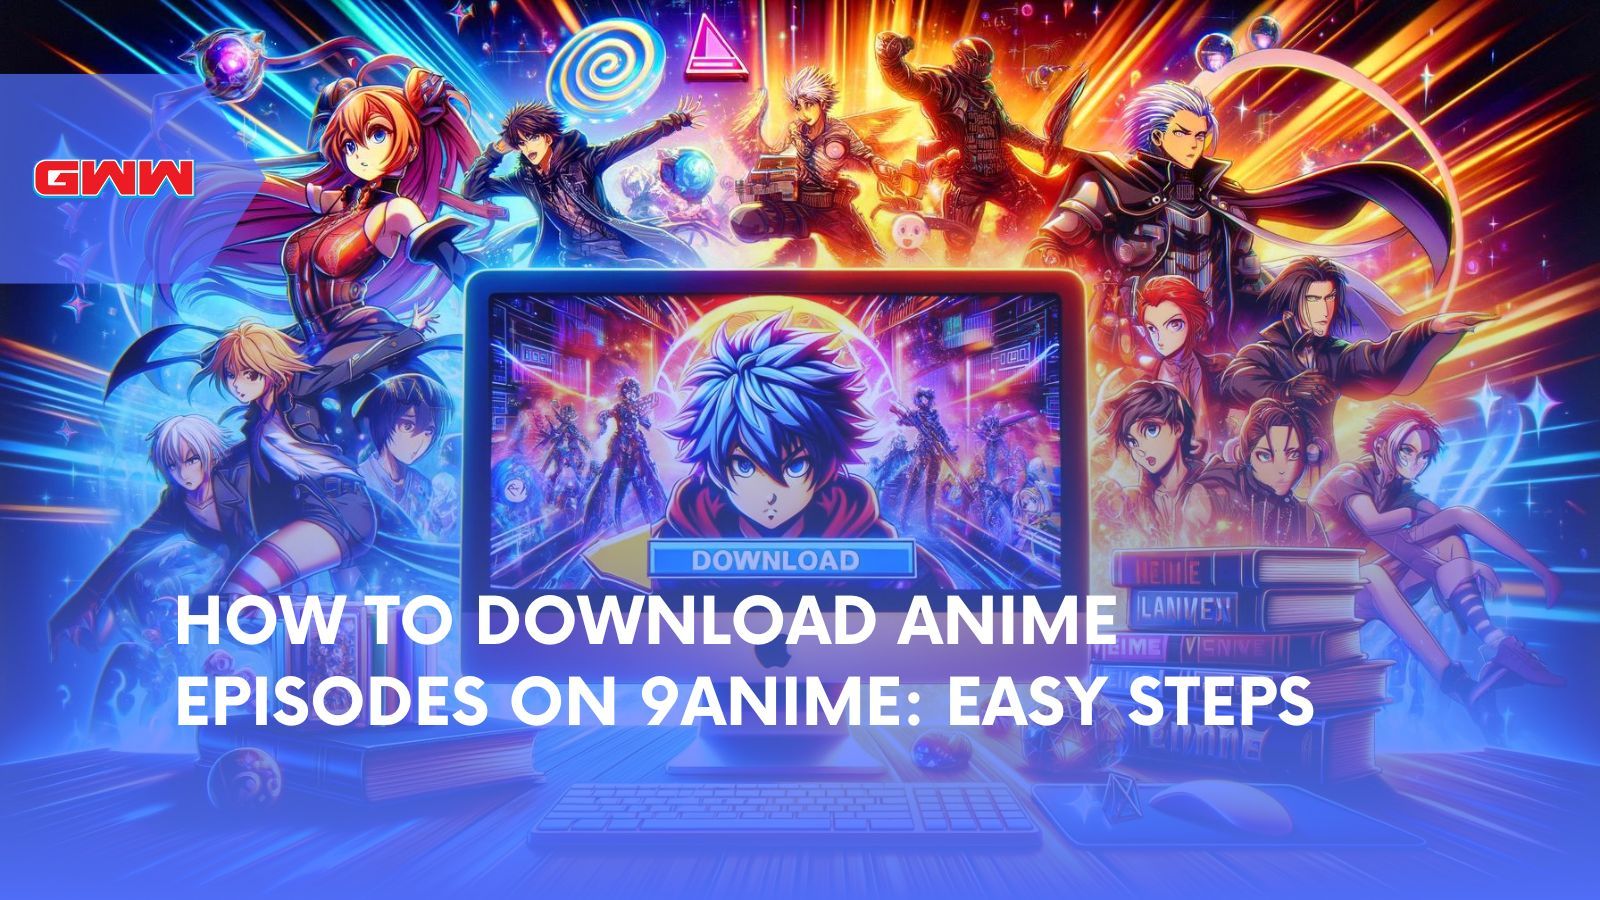 How to Download Anime Episodes on 9anime: Easy Steps